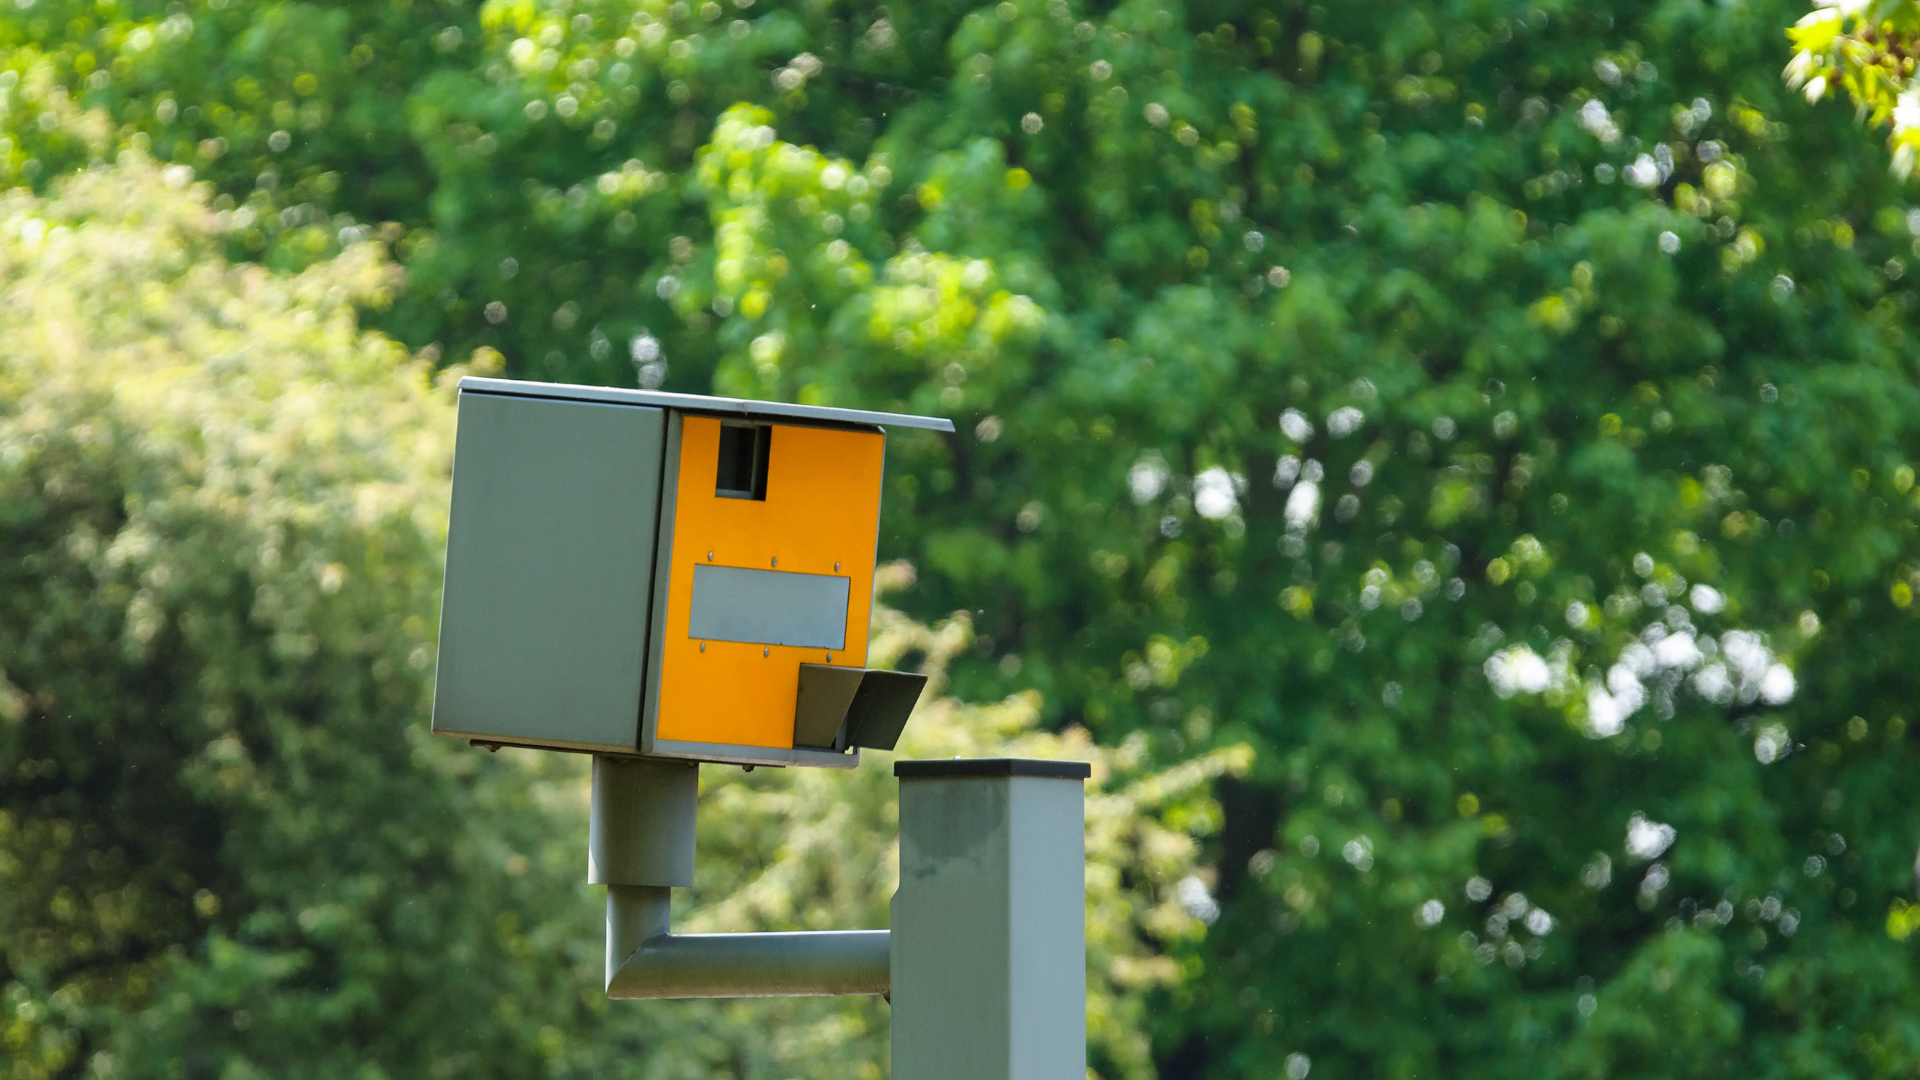 New data has revealed that almost half of speed cameras across England and Wales are not in operation